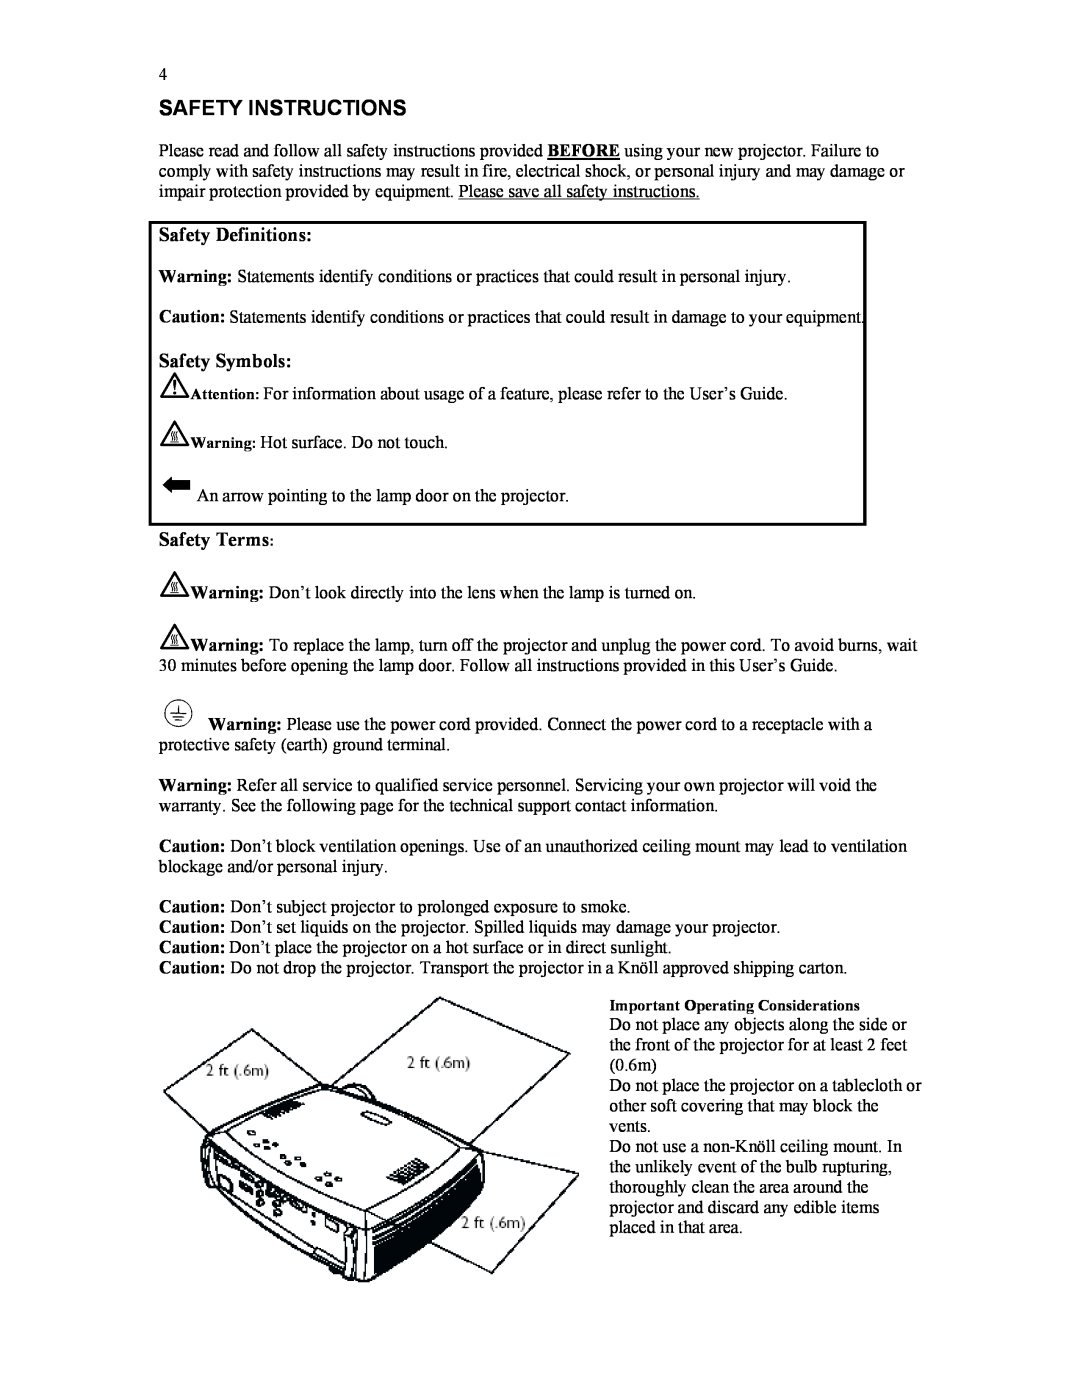 Knoll Systems HD177 user manual Safety Instructions, Safety Definitions, Safety Symbols, Safety Terms 